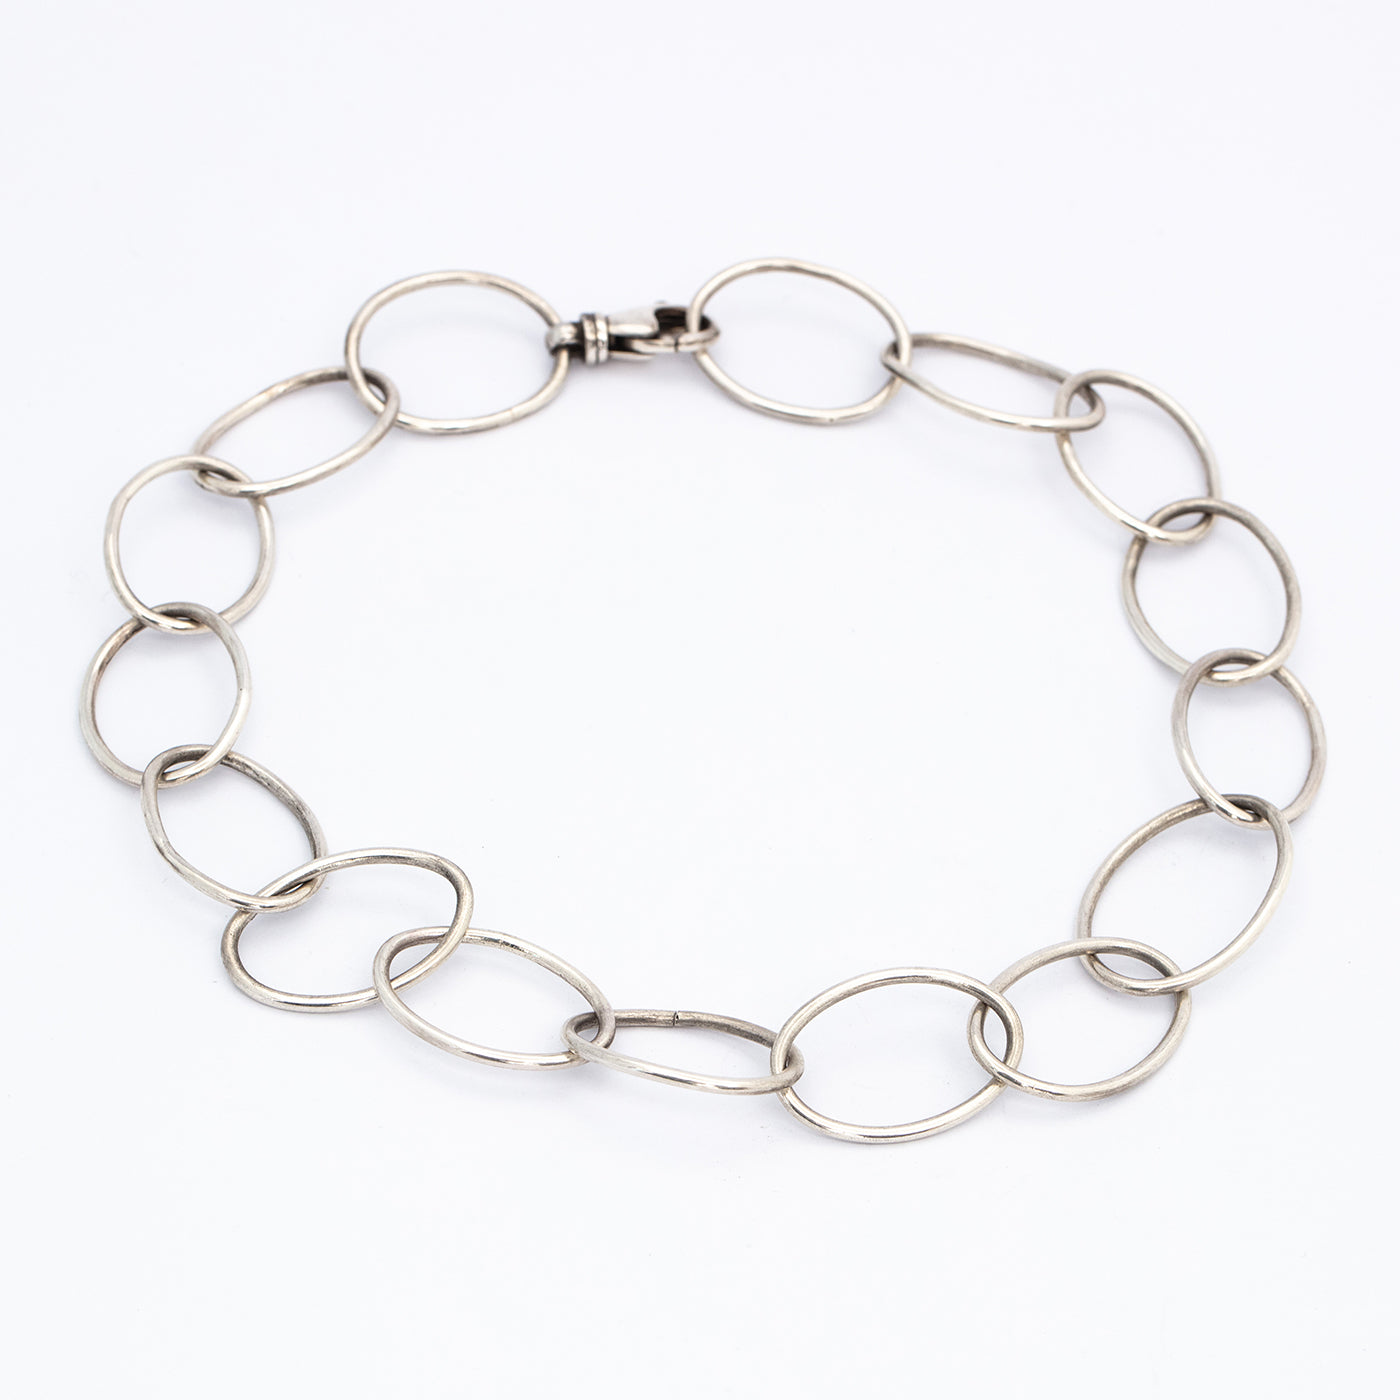 Necklace choker Gia sterling silver product image innan jewellery berlin